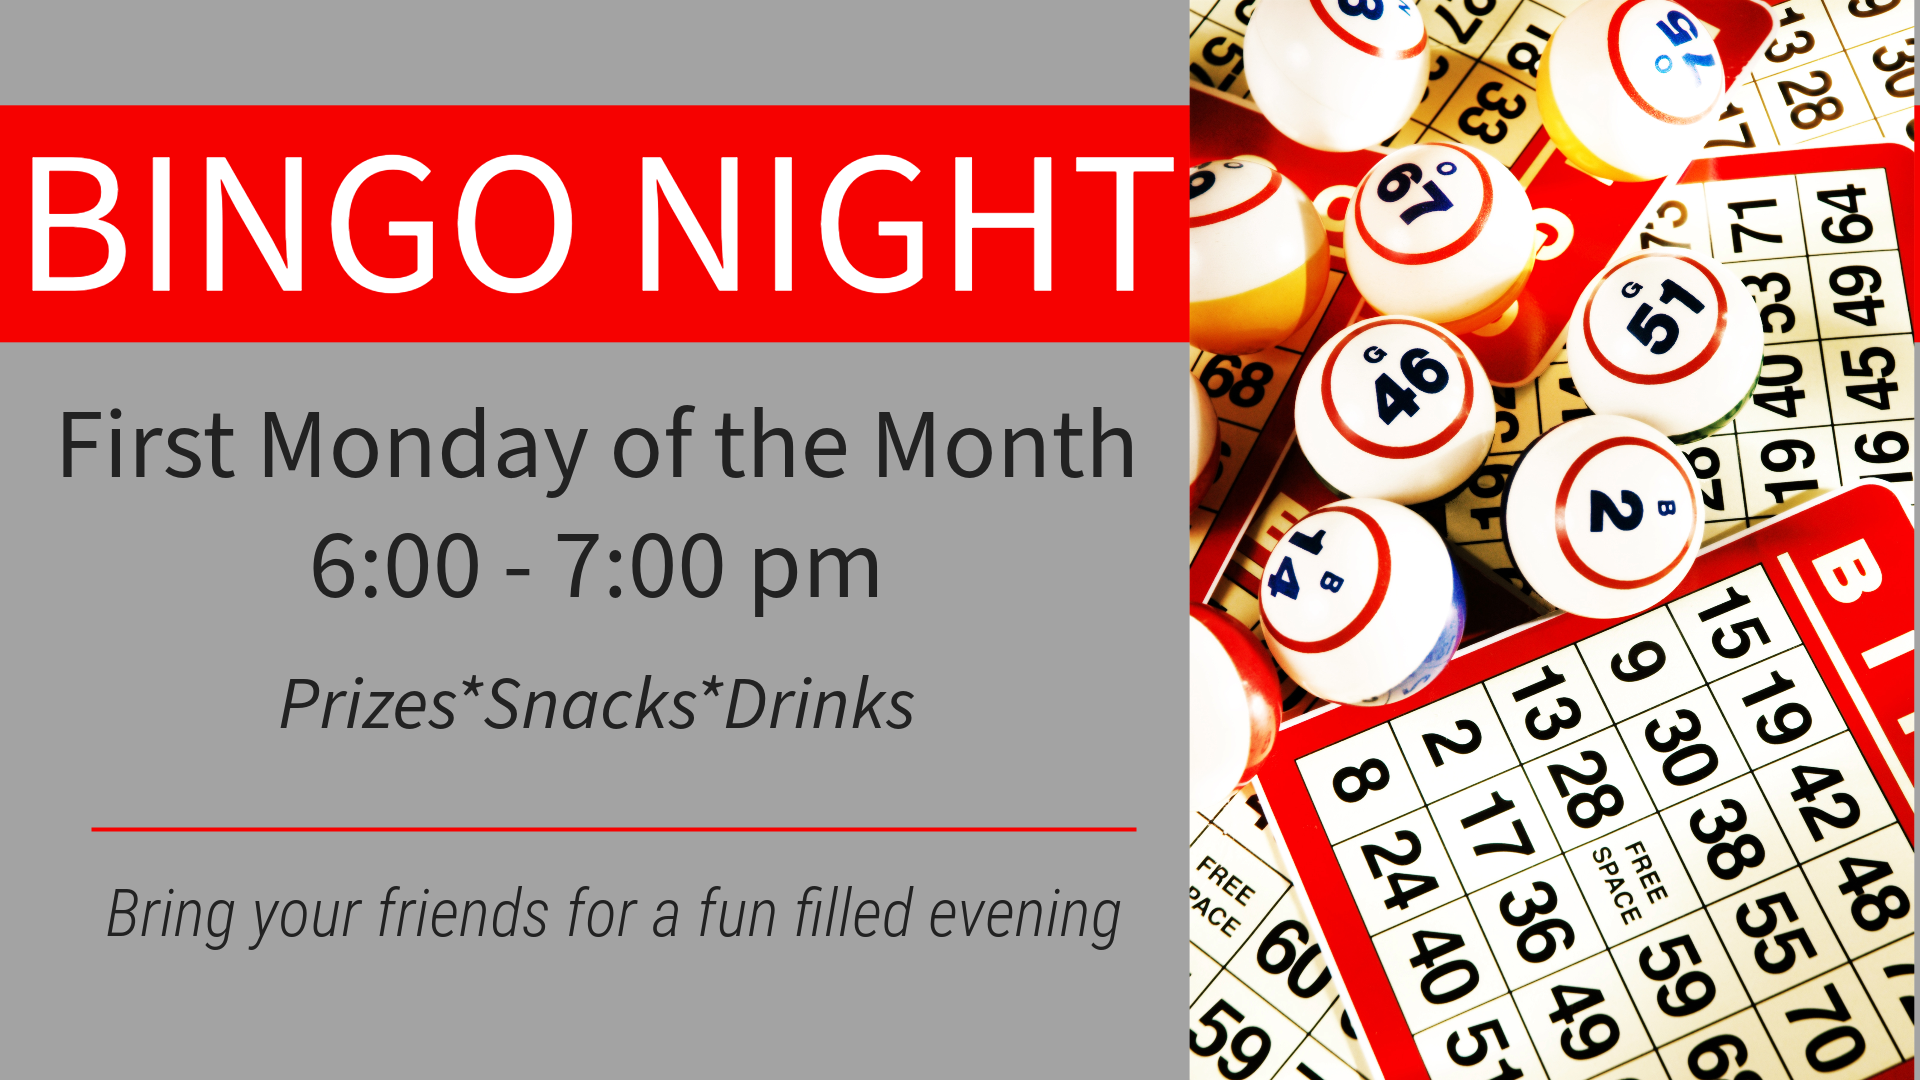 BINGO Night First Monday of the Month 6:00-7:00 pm Prizes*Snacks*Drinks Bring your friends for a fun filled evening